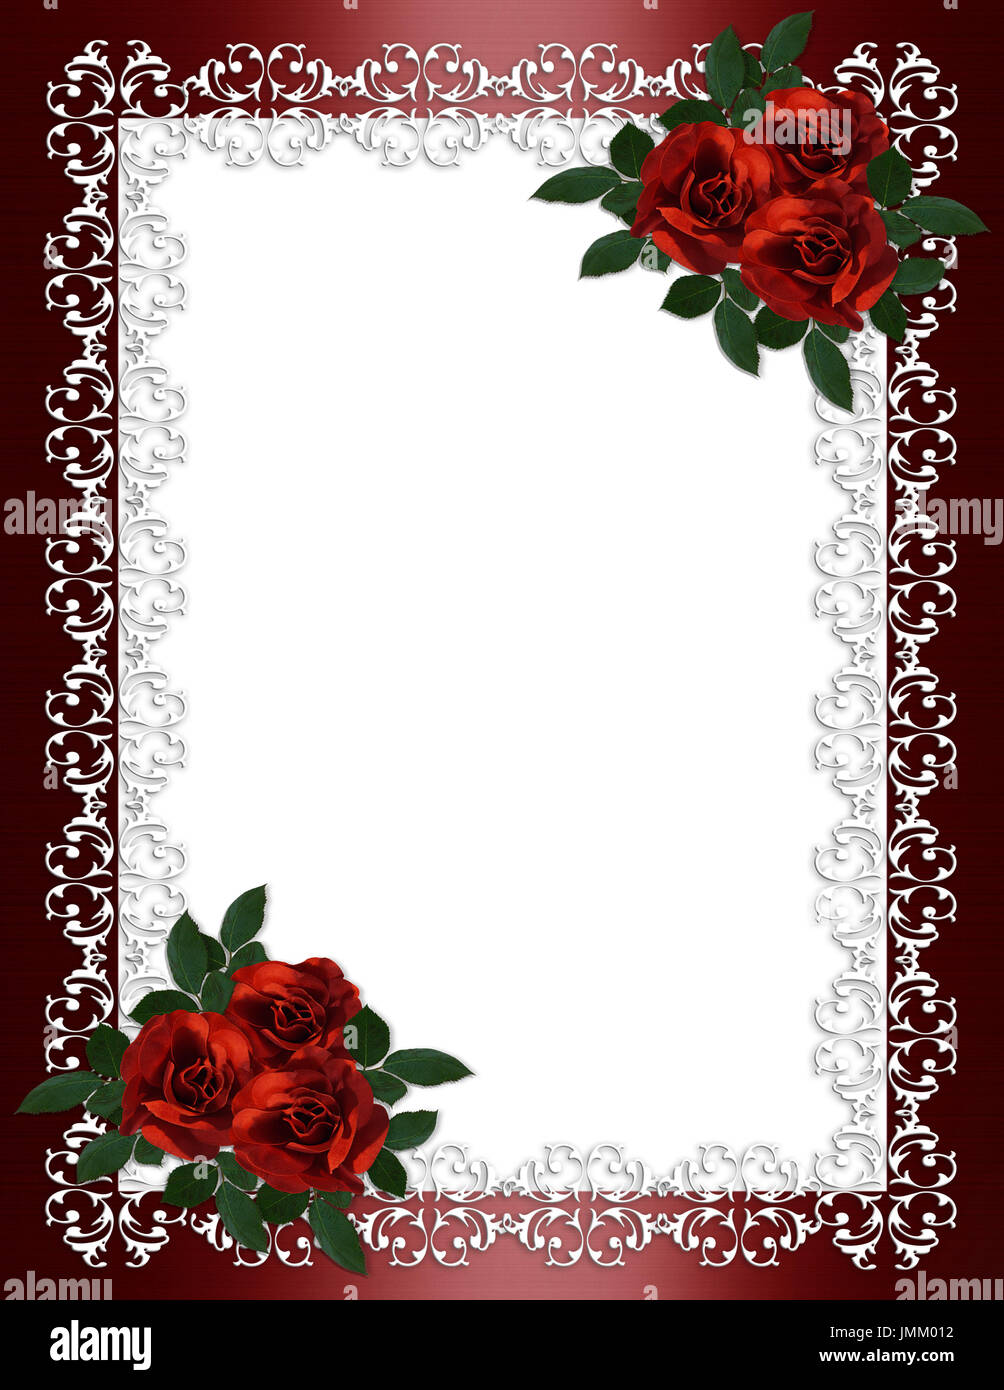 Ornamental frame, red roses on burgundy satin for border, wedding,  engagement party invitation or background with copy space Stock Photo -  Alamy